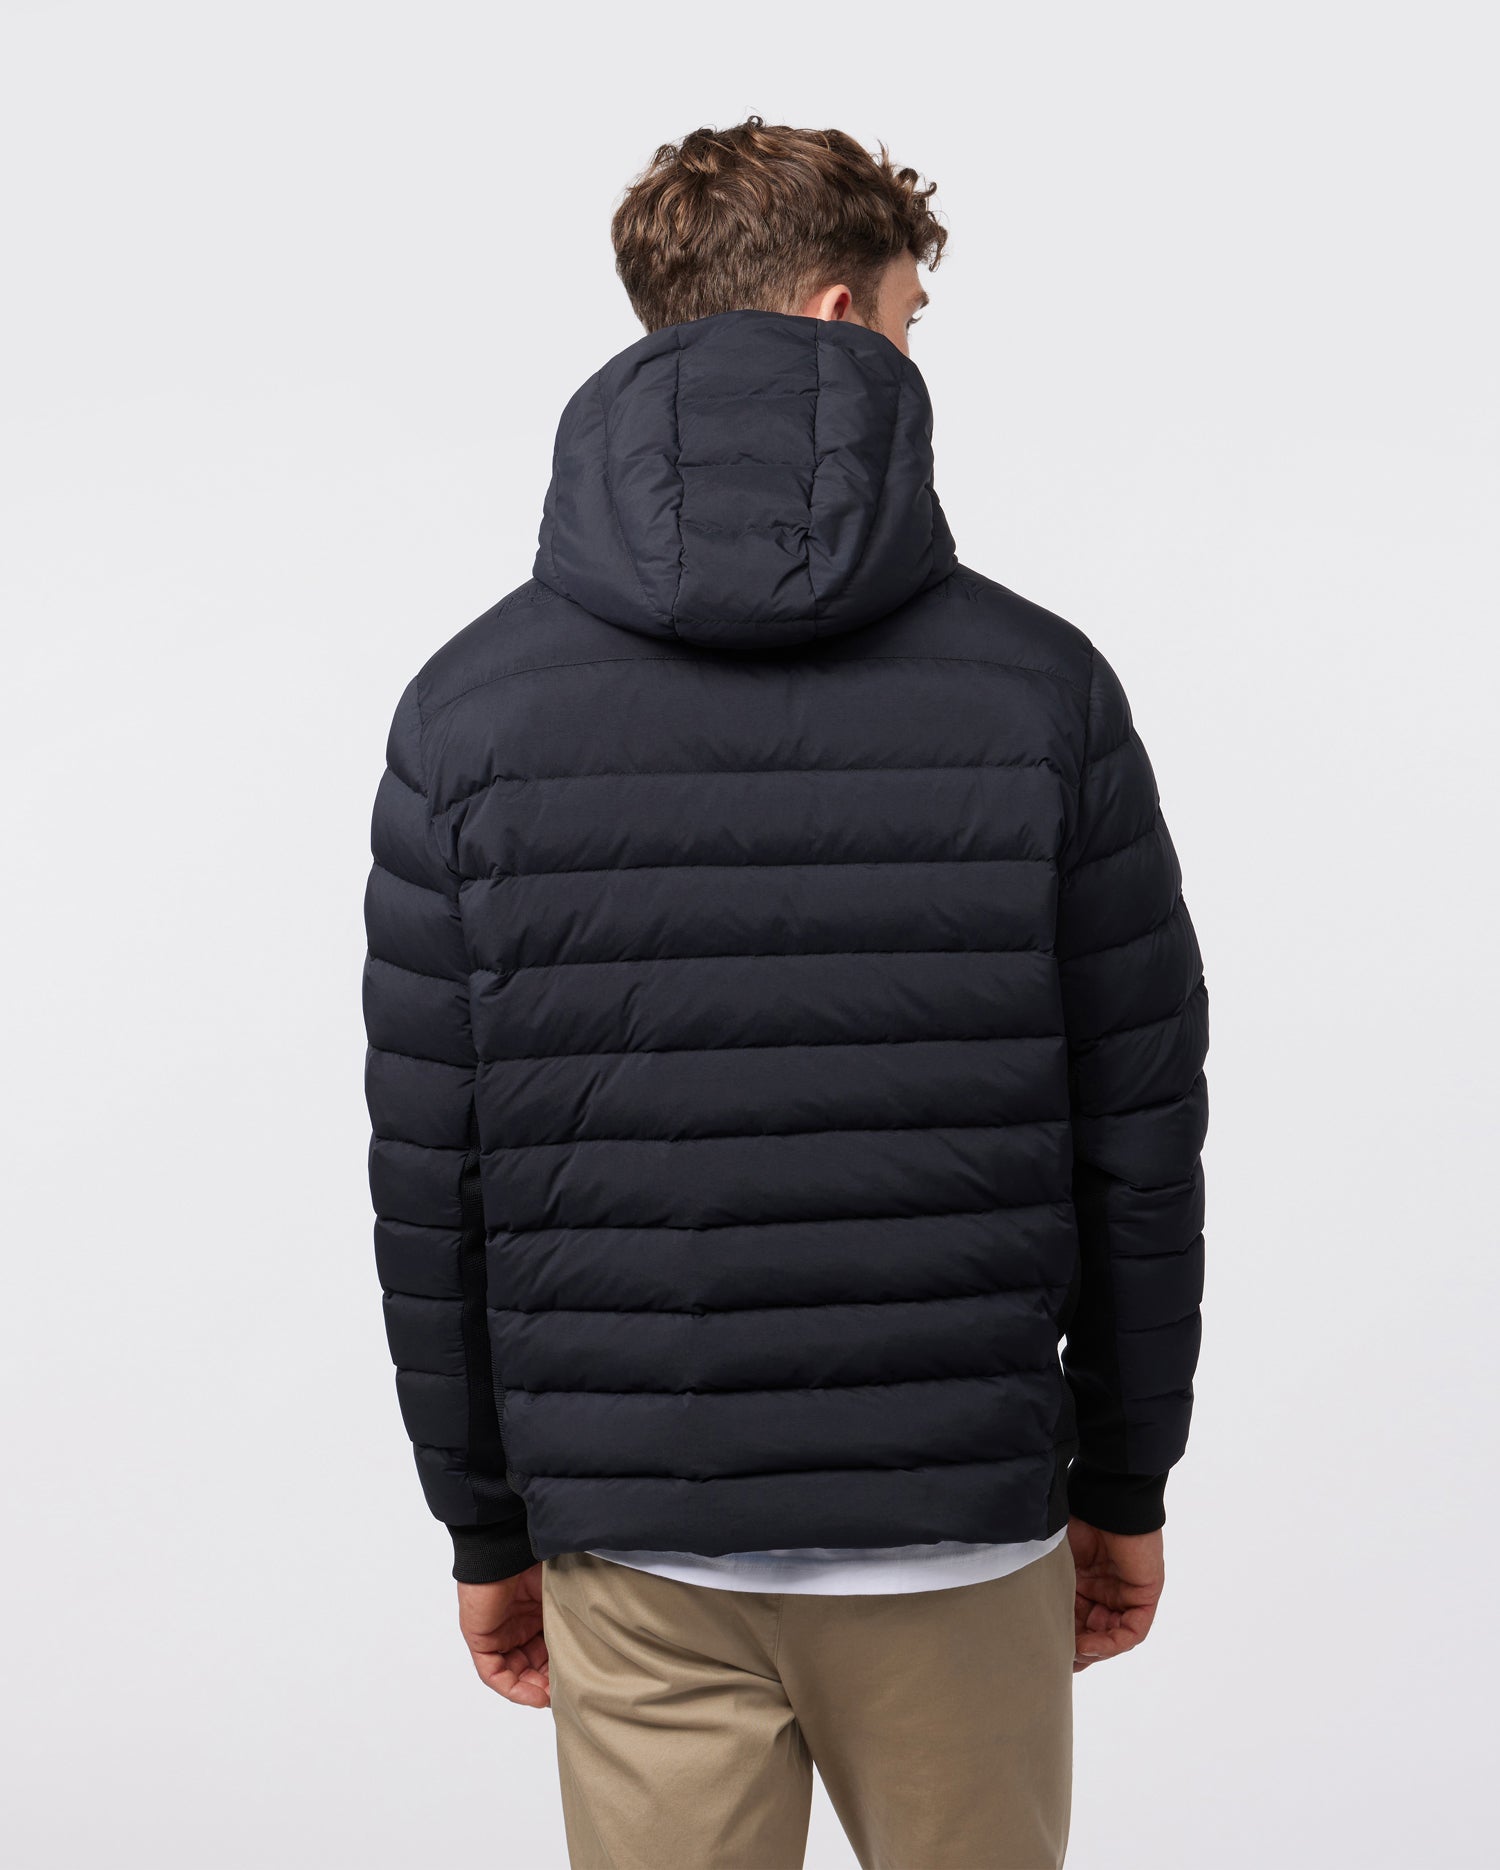 MENS BLACK EVANSTON PUFFER JACKET WITH REMOVABLE HOOD | PSYCHO BUNNY ...